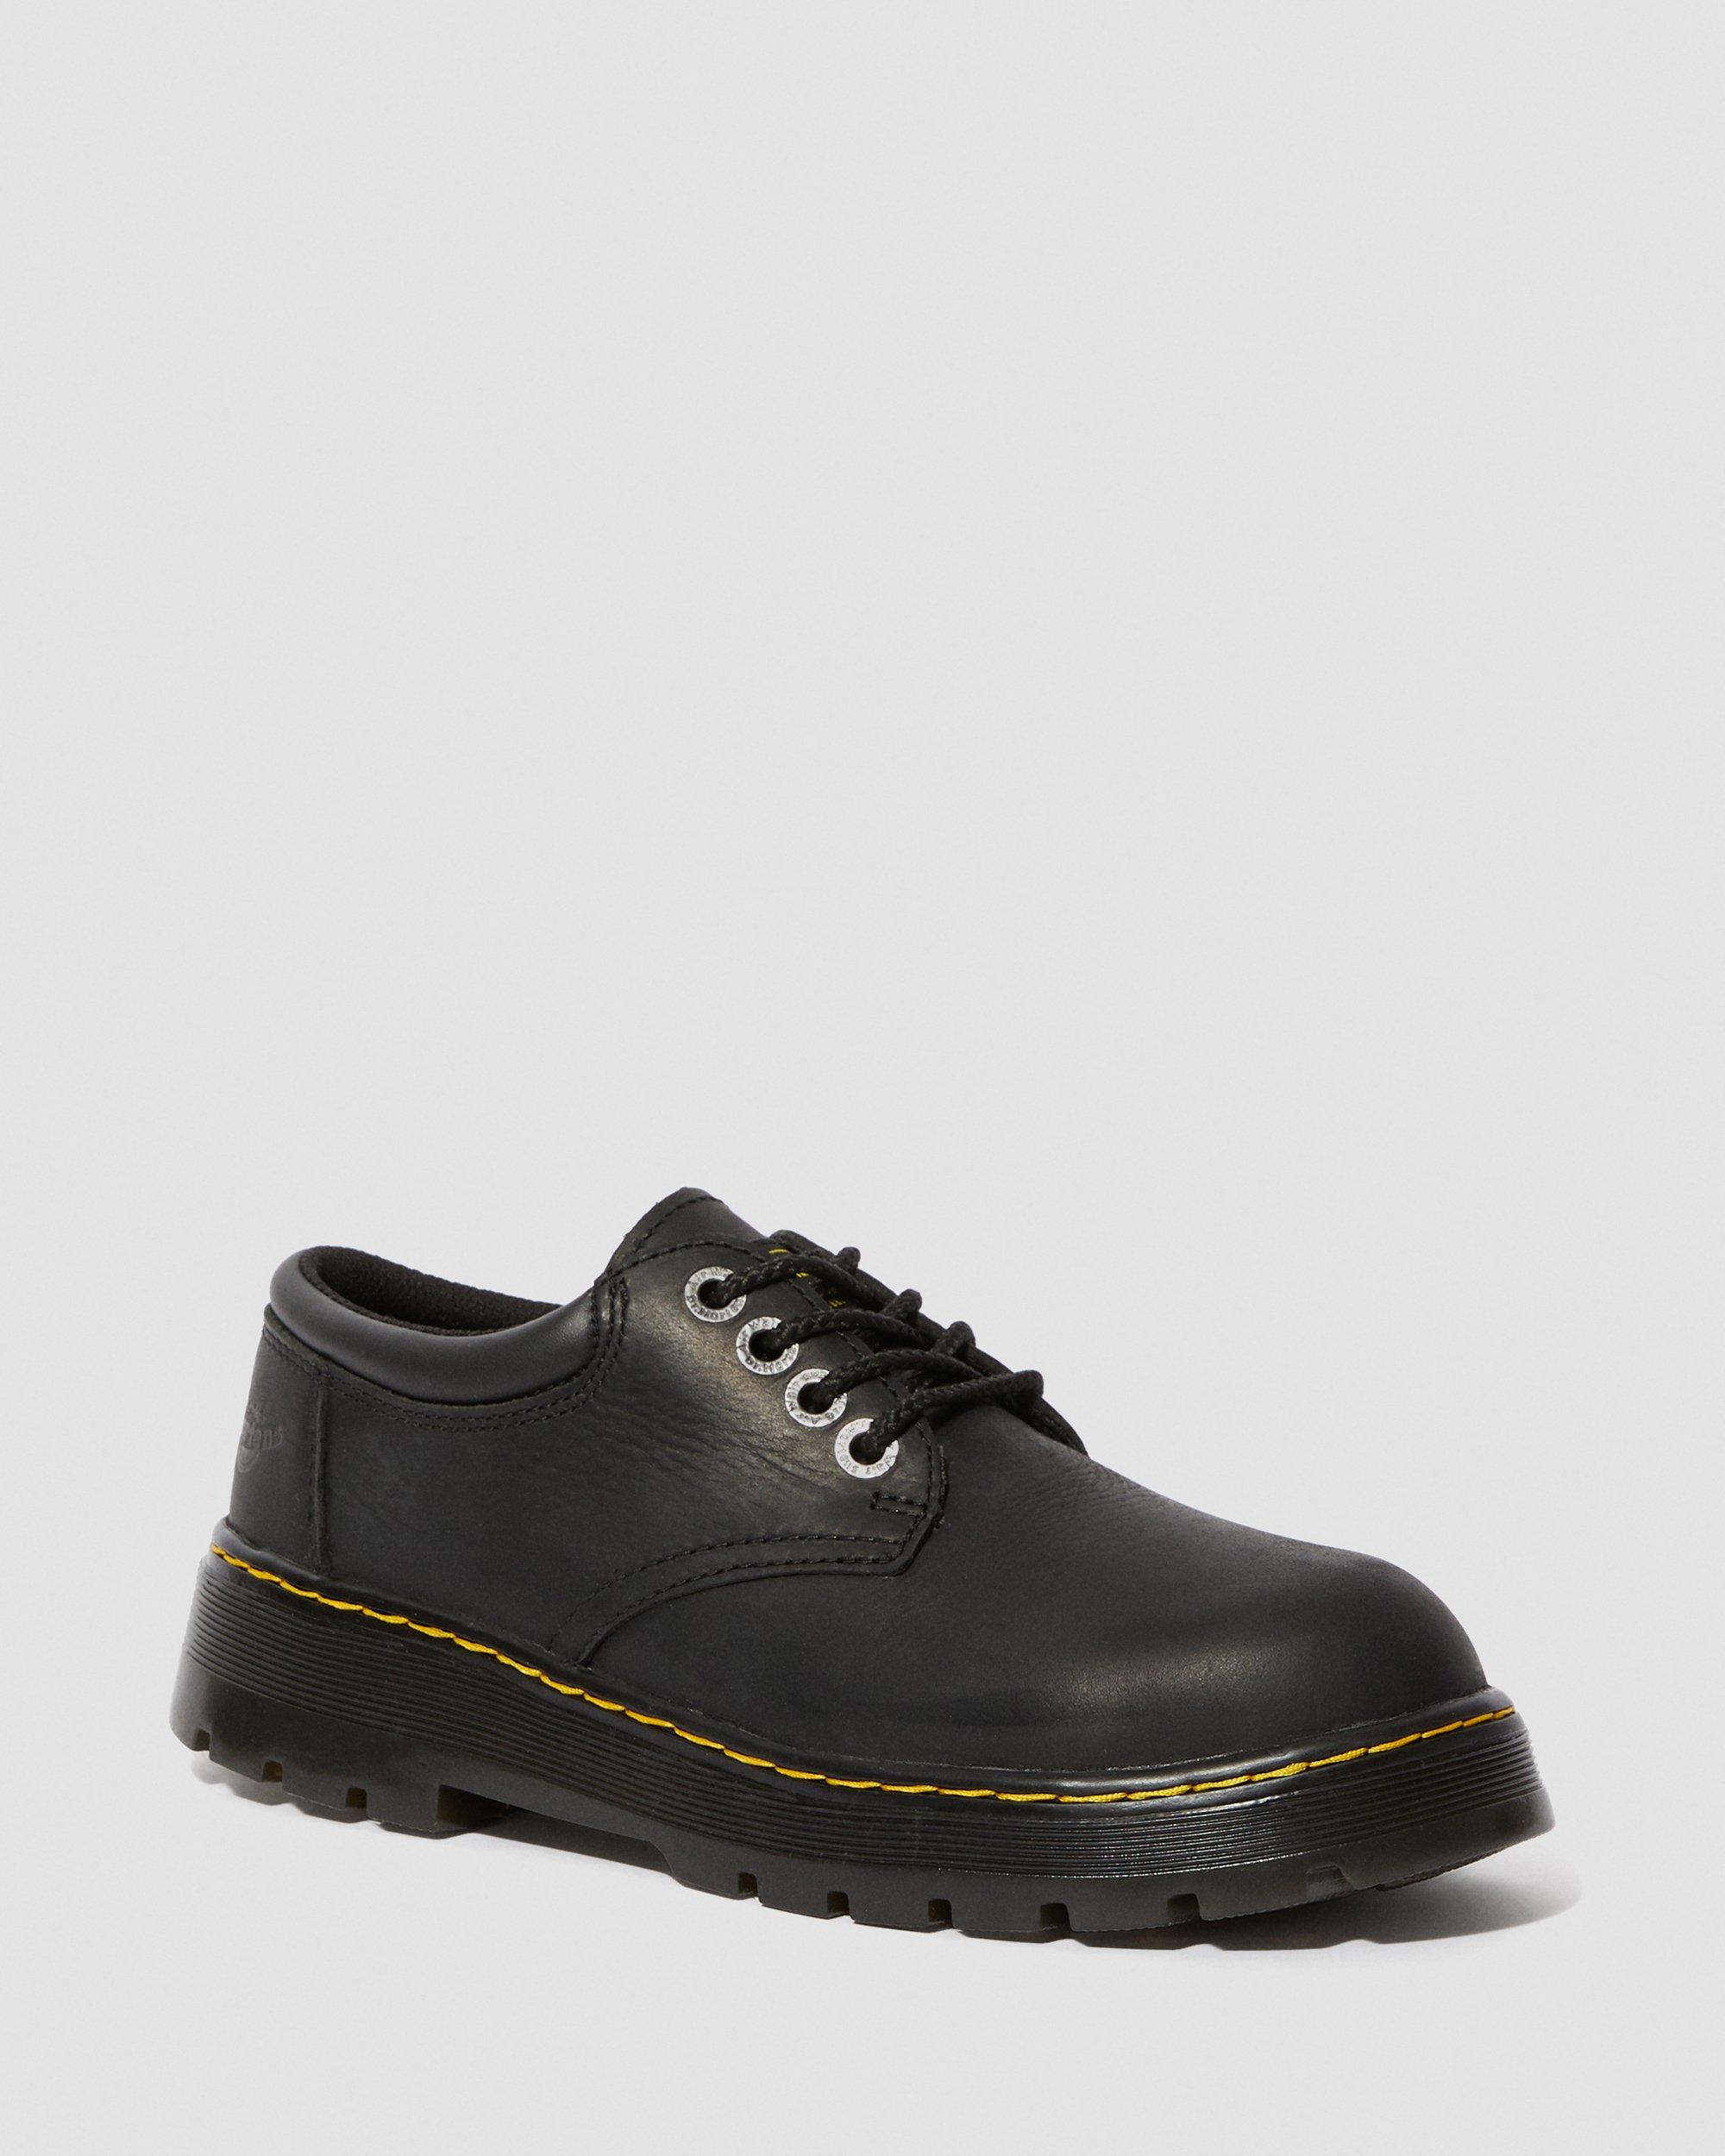 who sells doc martin shoes